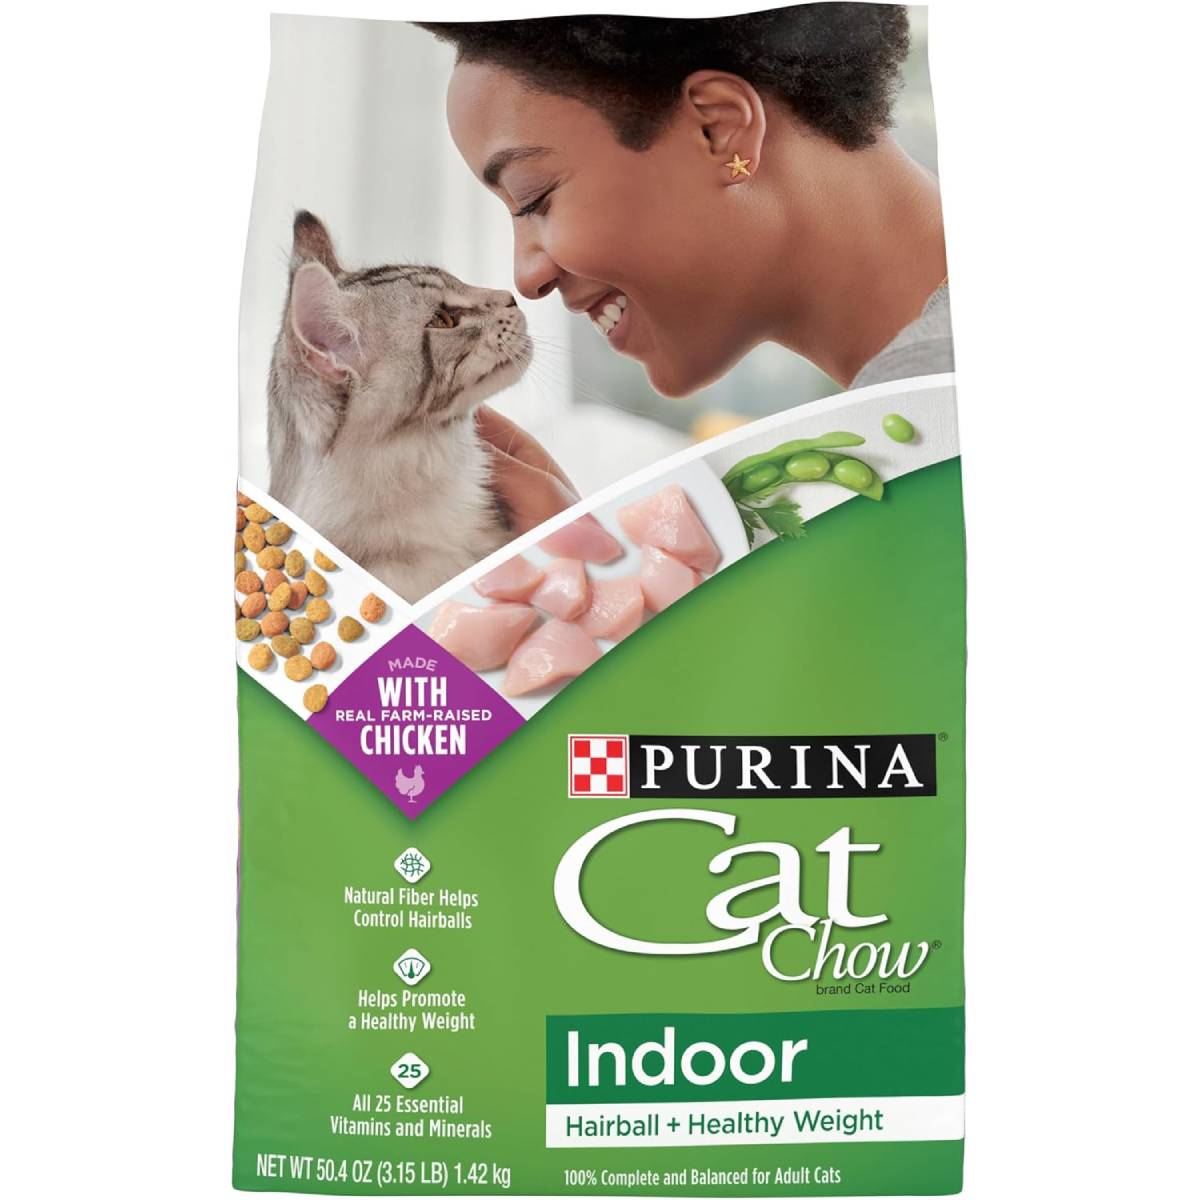 Purina Cat Chow Healthy Weight Dry Cat Food